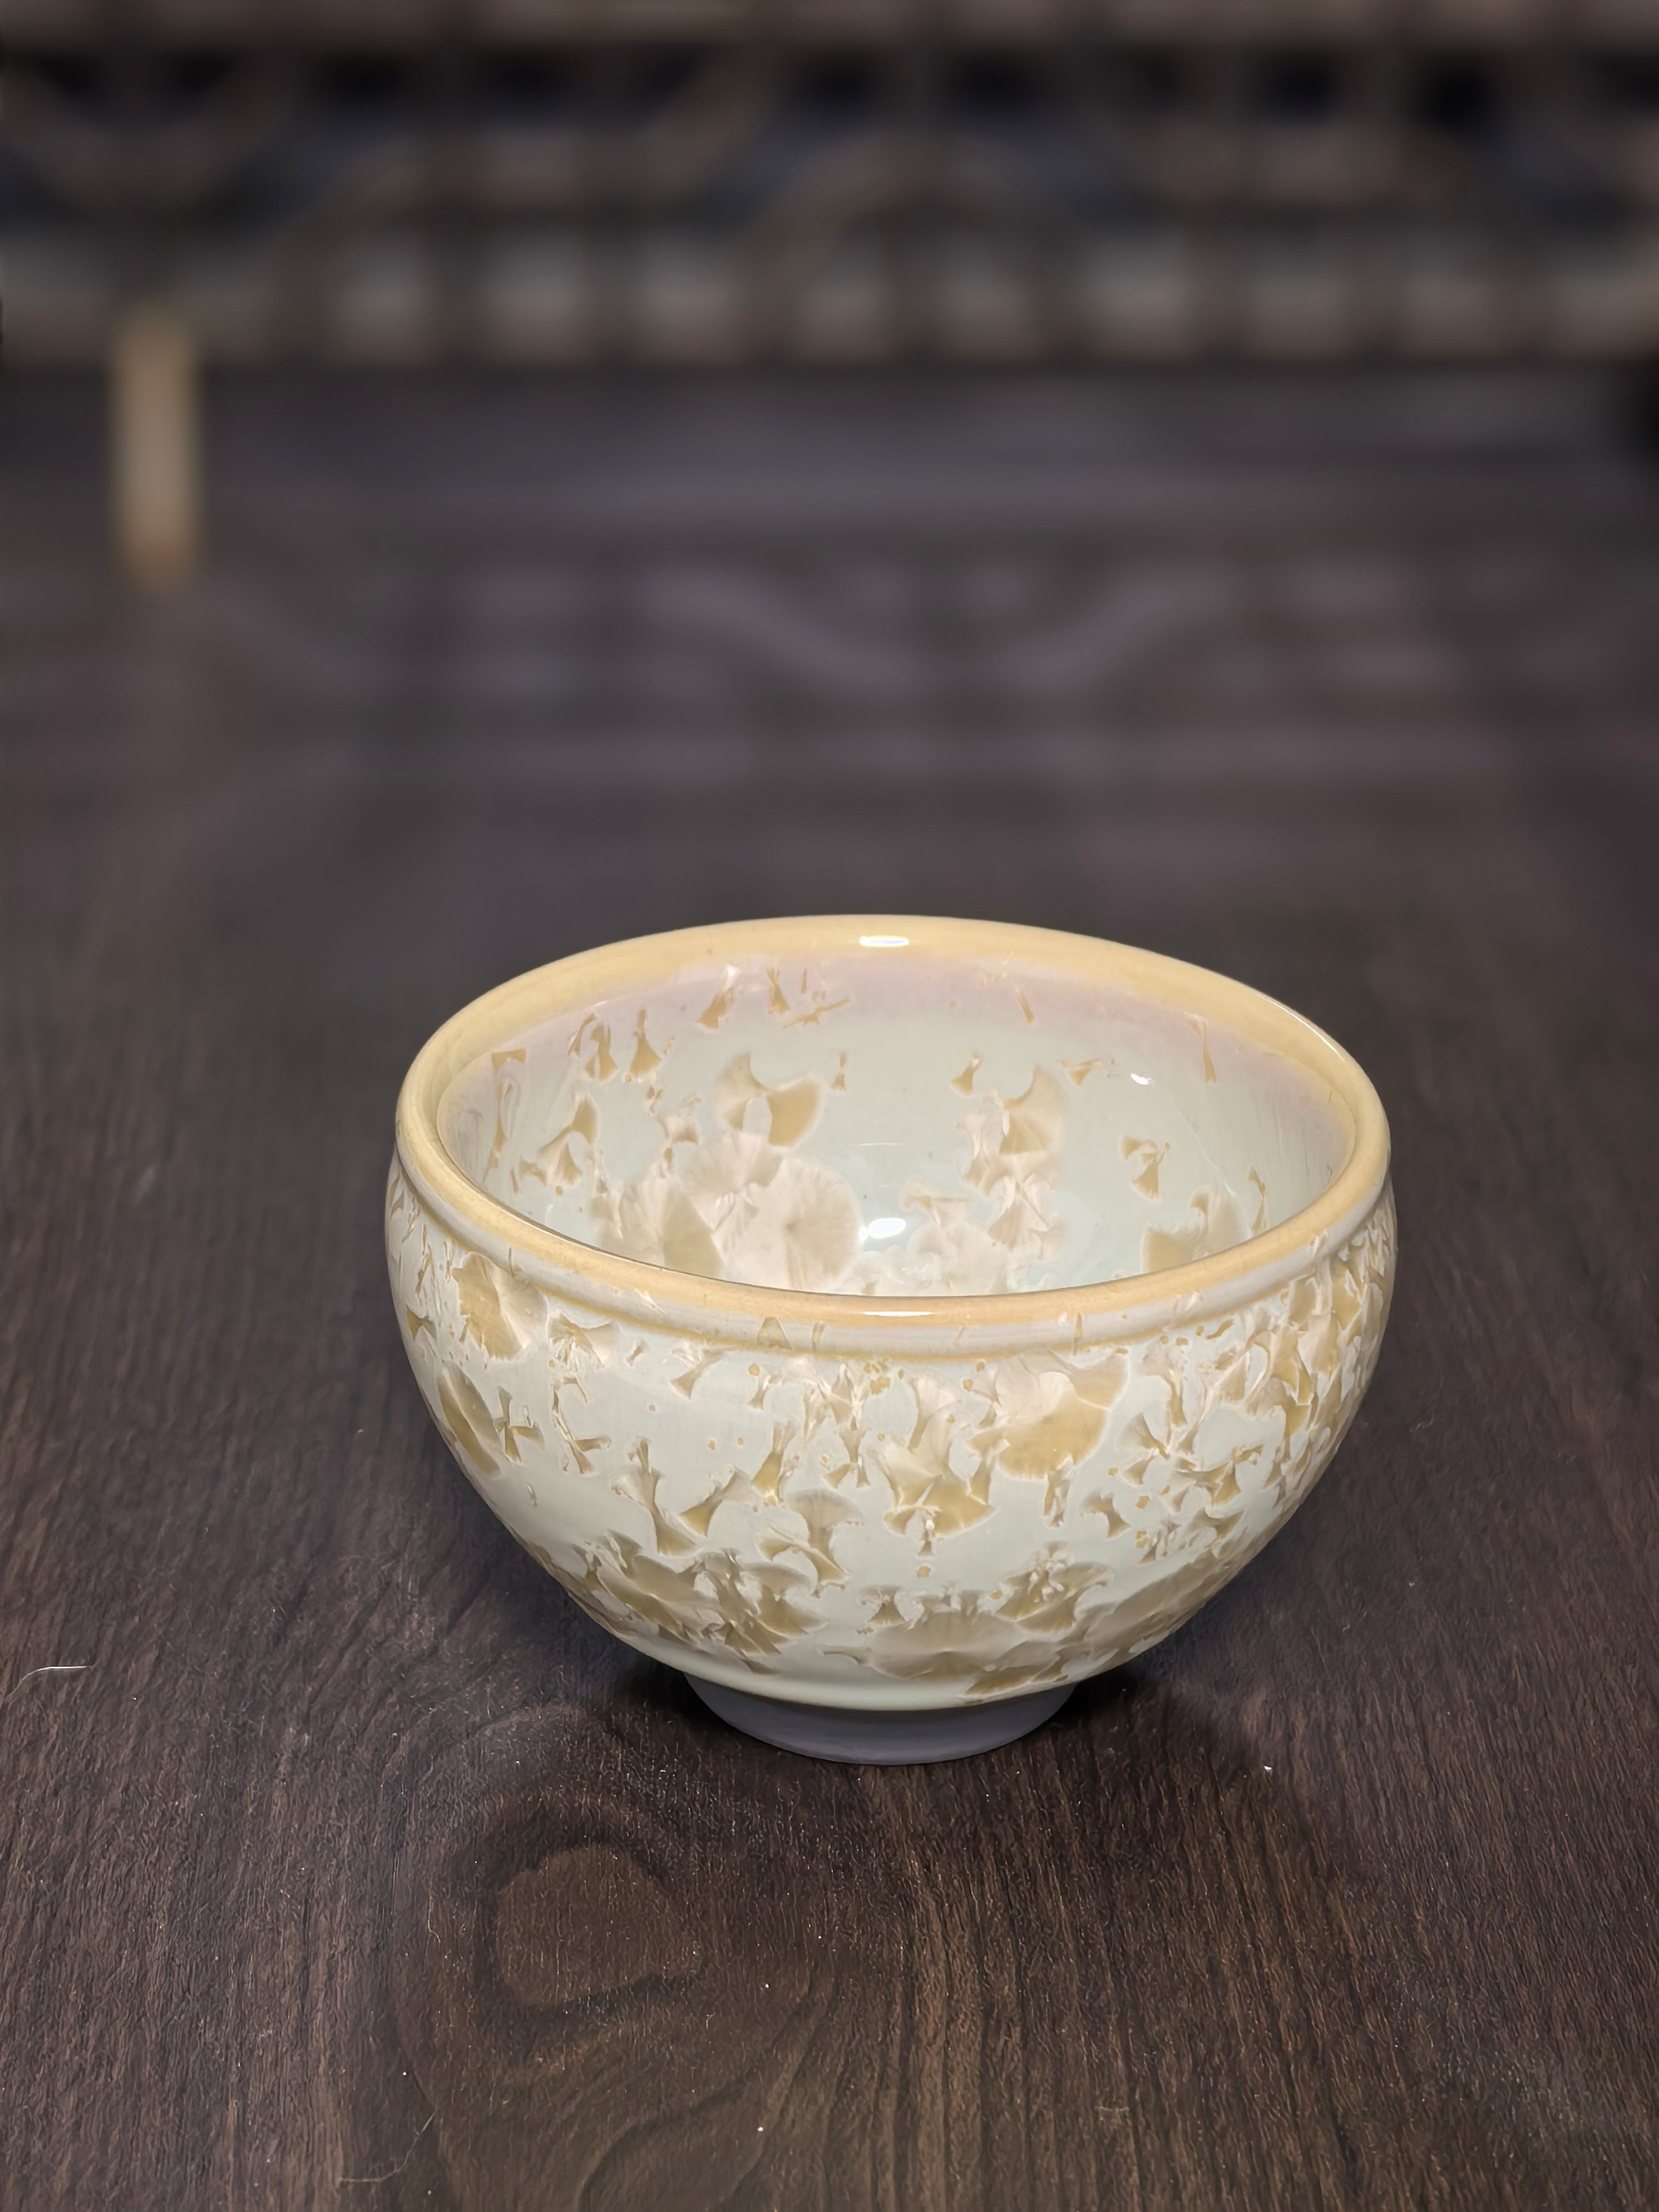 Cherry Blossom Jian Ware Bowl – Delicate Floral Elegance